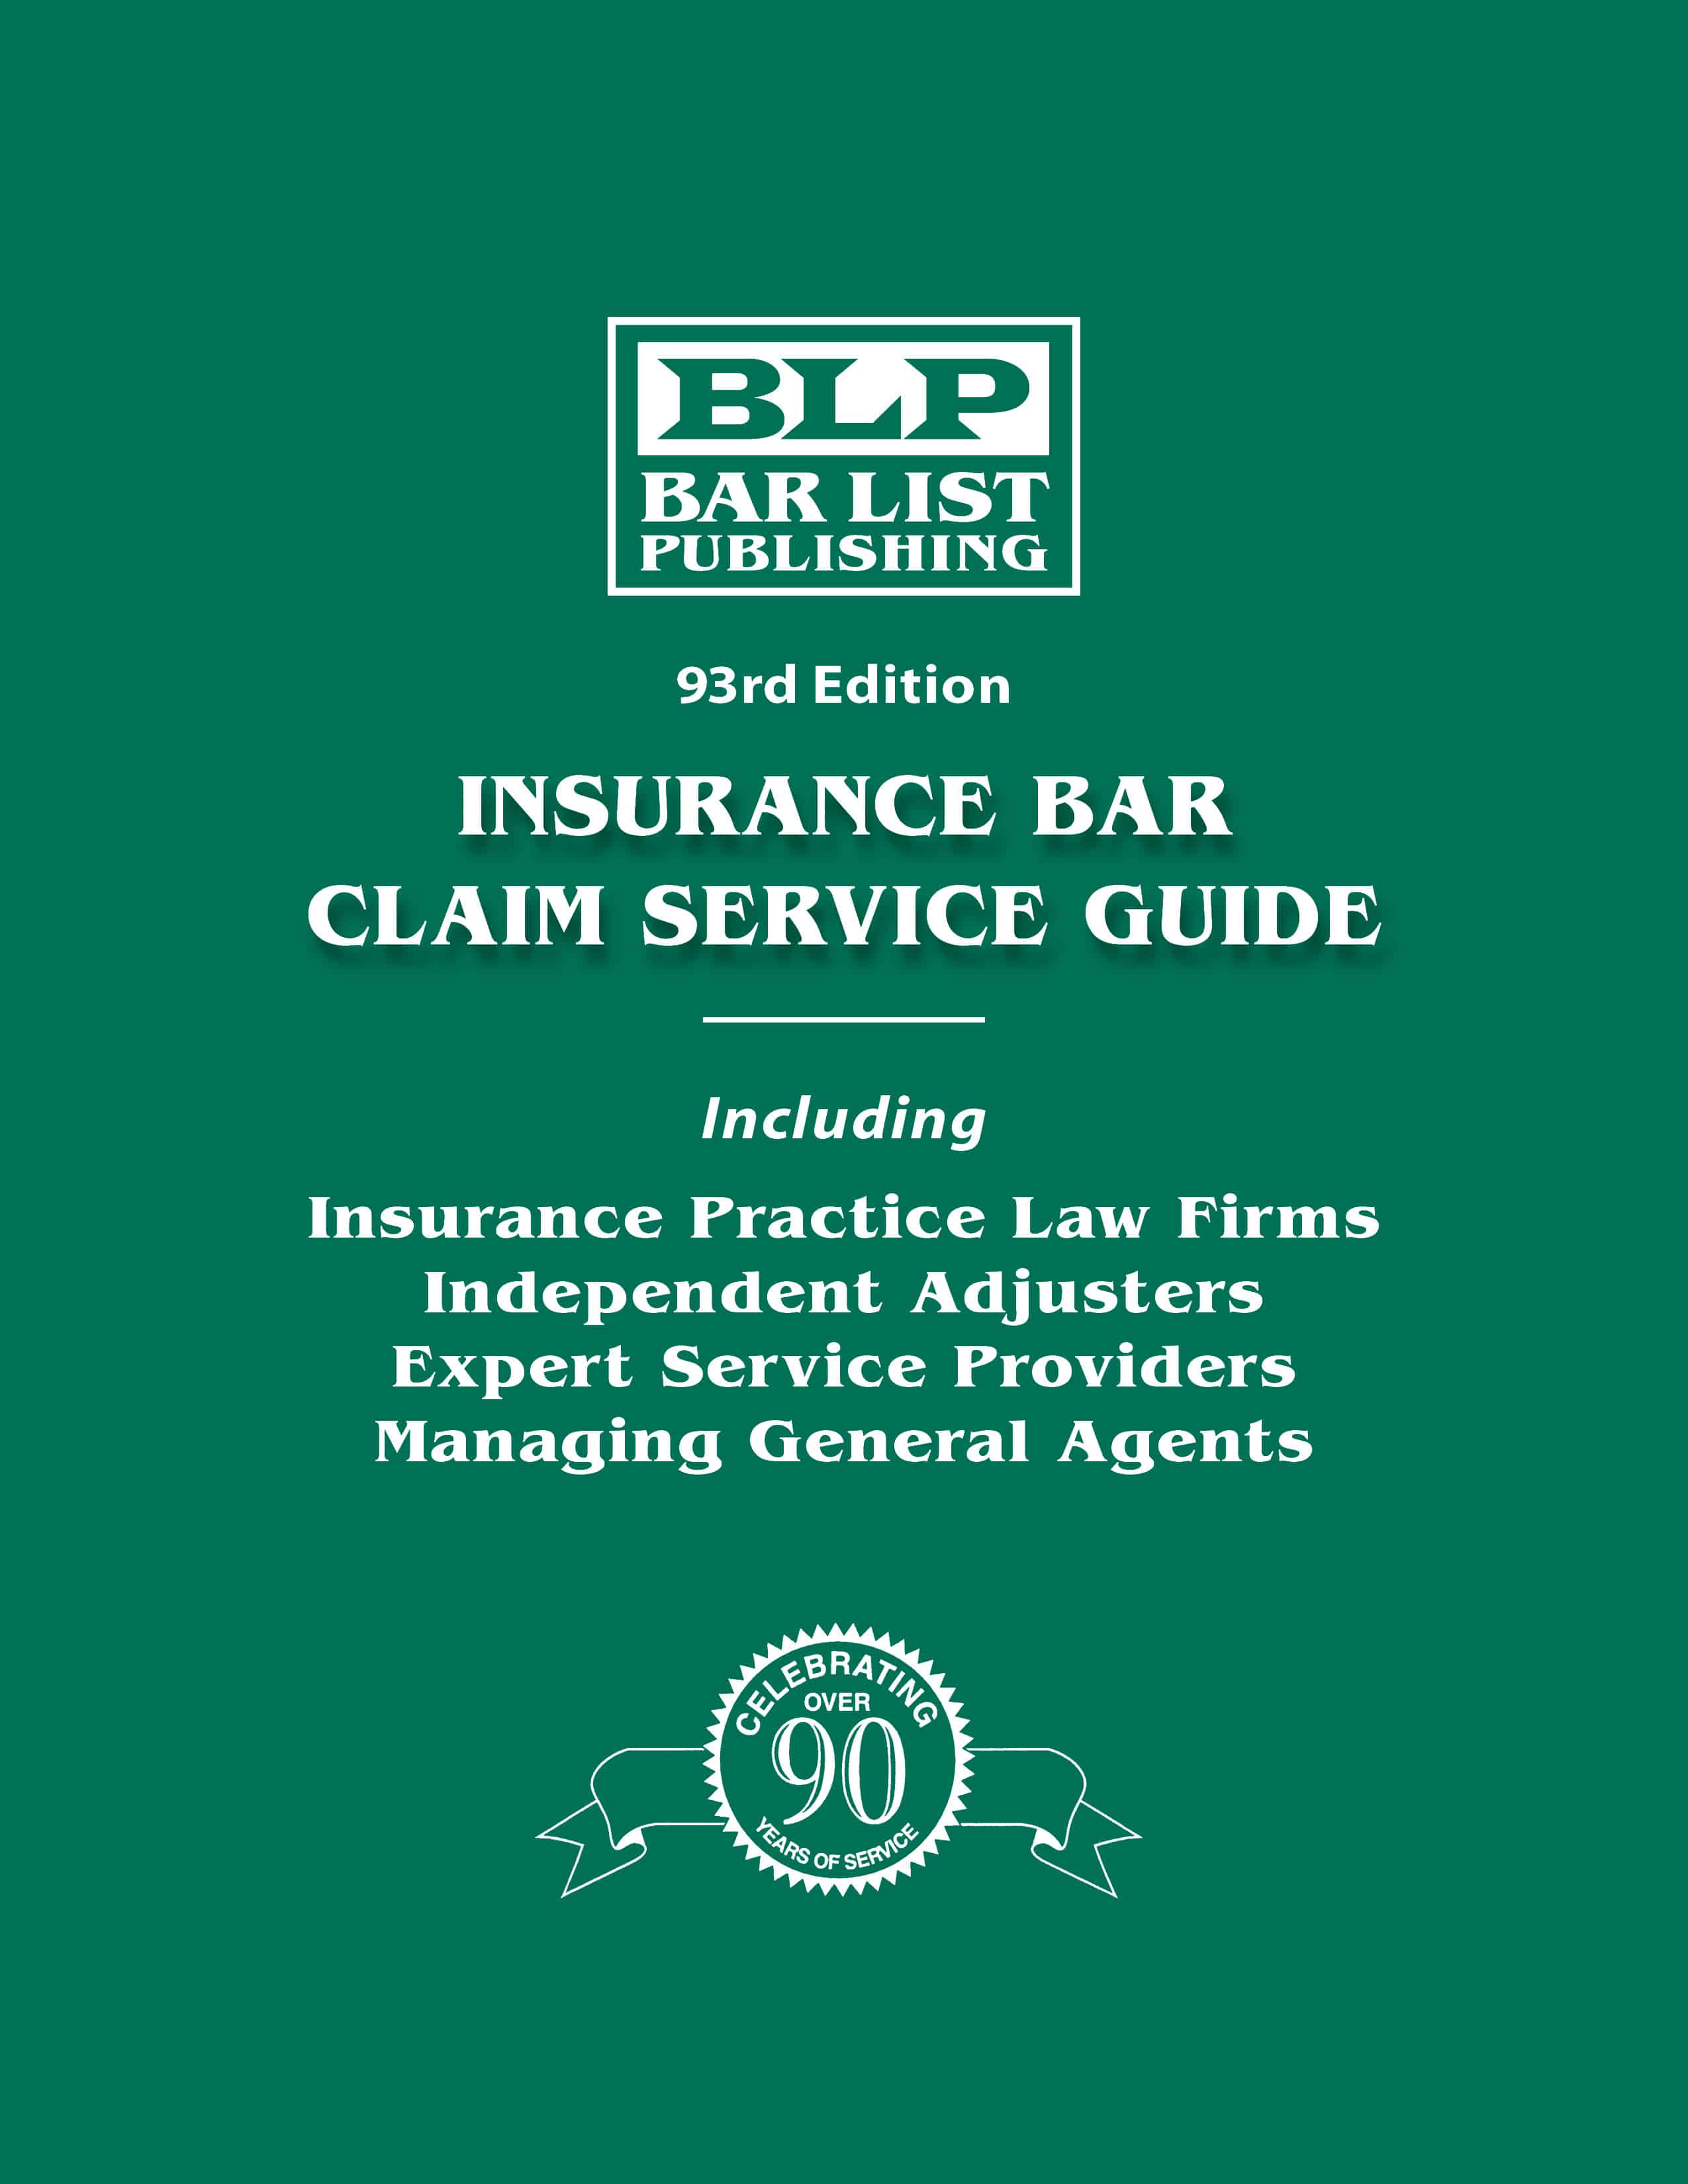 Insurance Bar and Claim Service Guide Directory